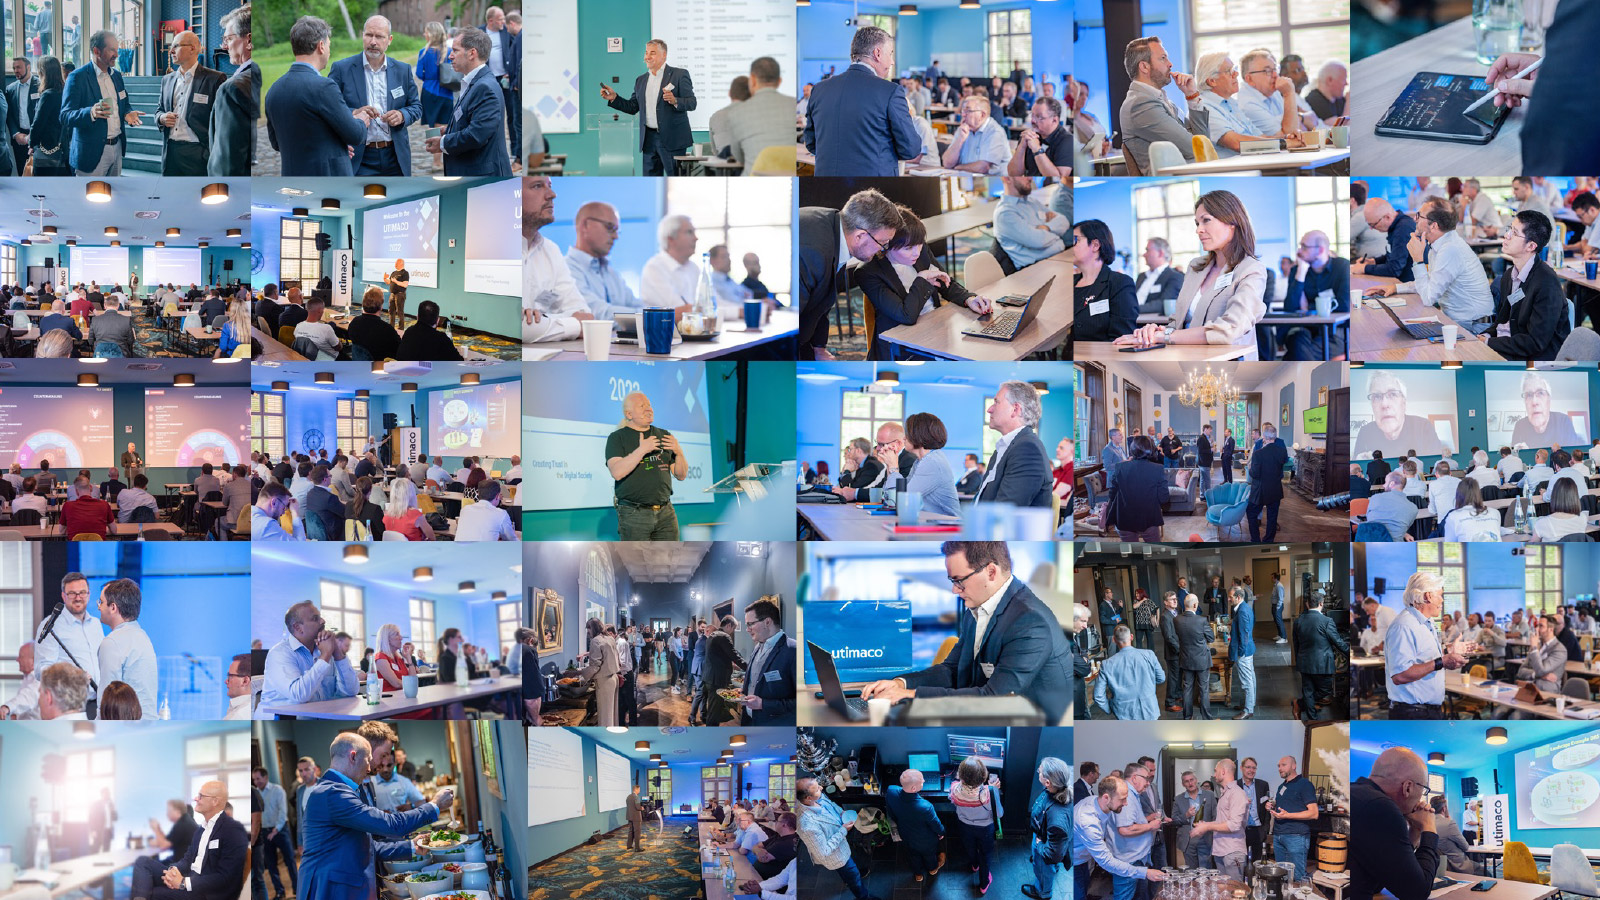 Collage of impressions from Customer Advisory Board event